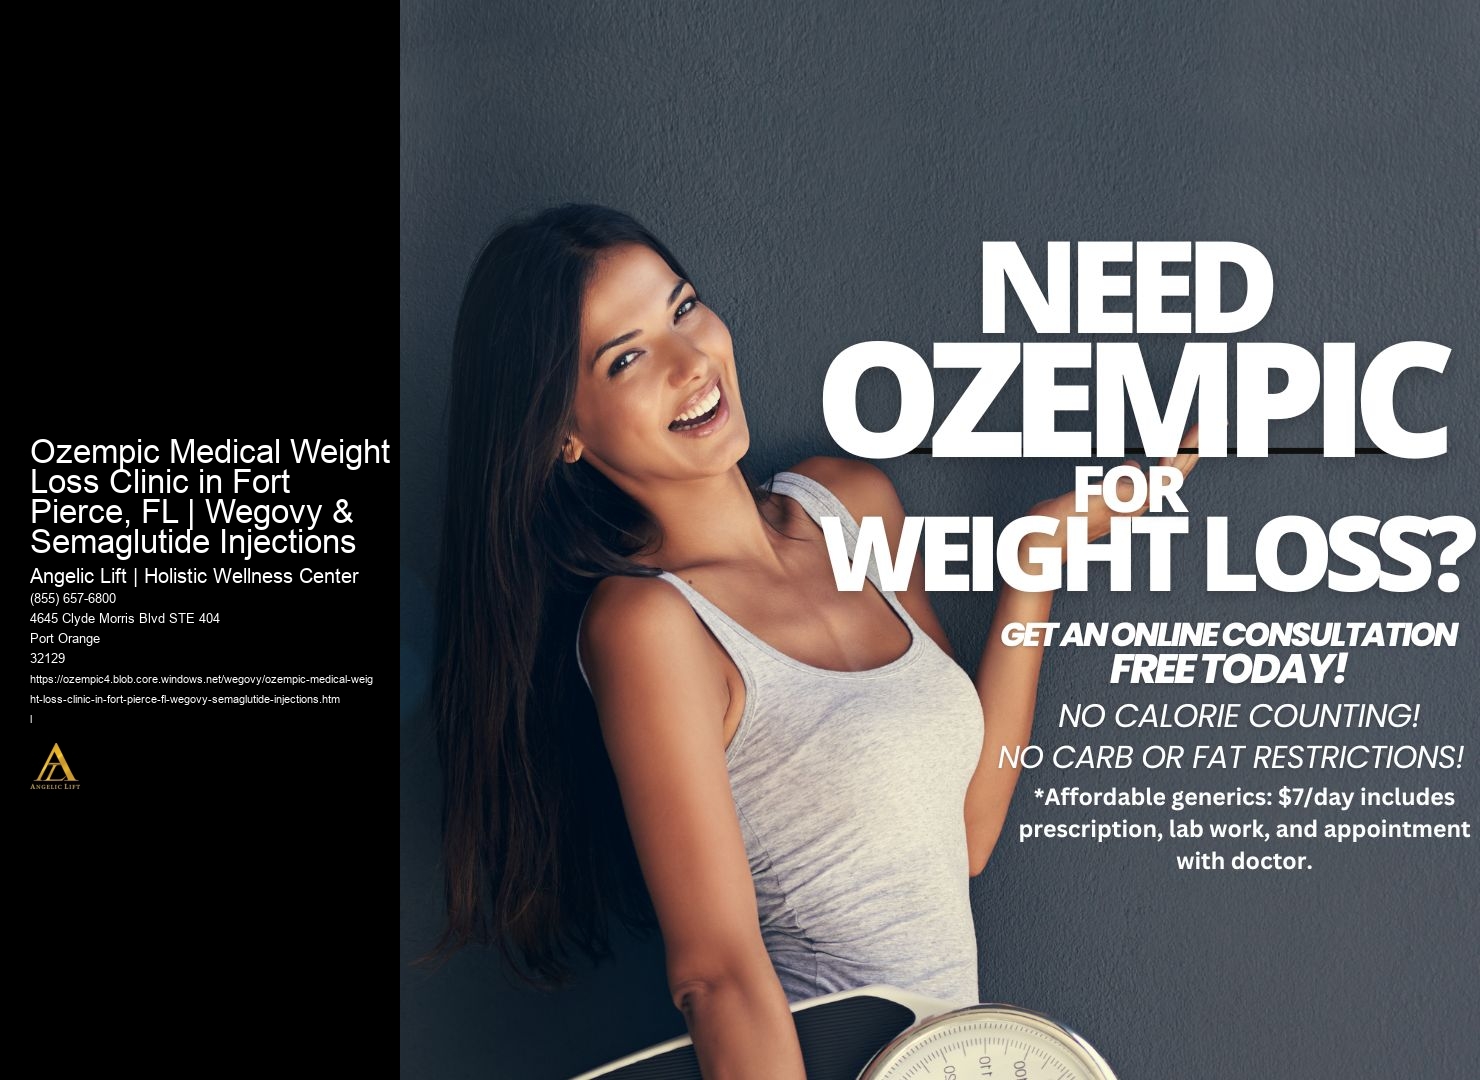 Ozempic Medical Weight Loss Clinic in Fort Pierce, FL | Wegovy & Semaglutide Injections